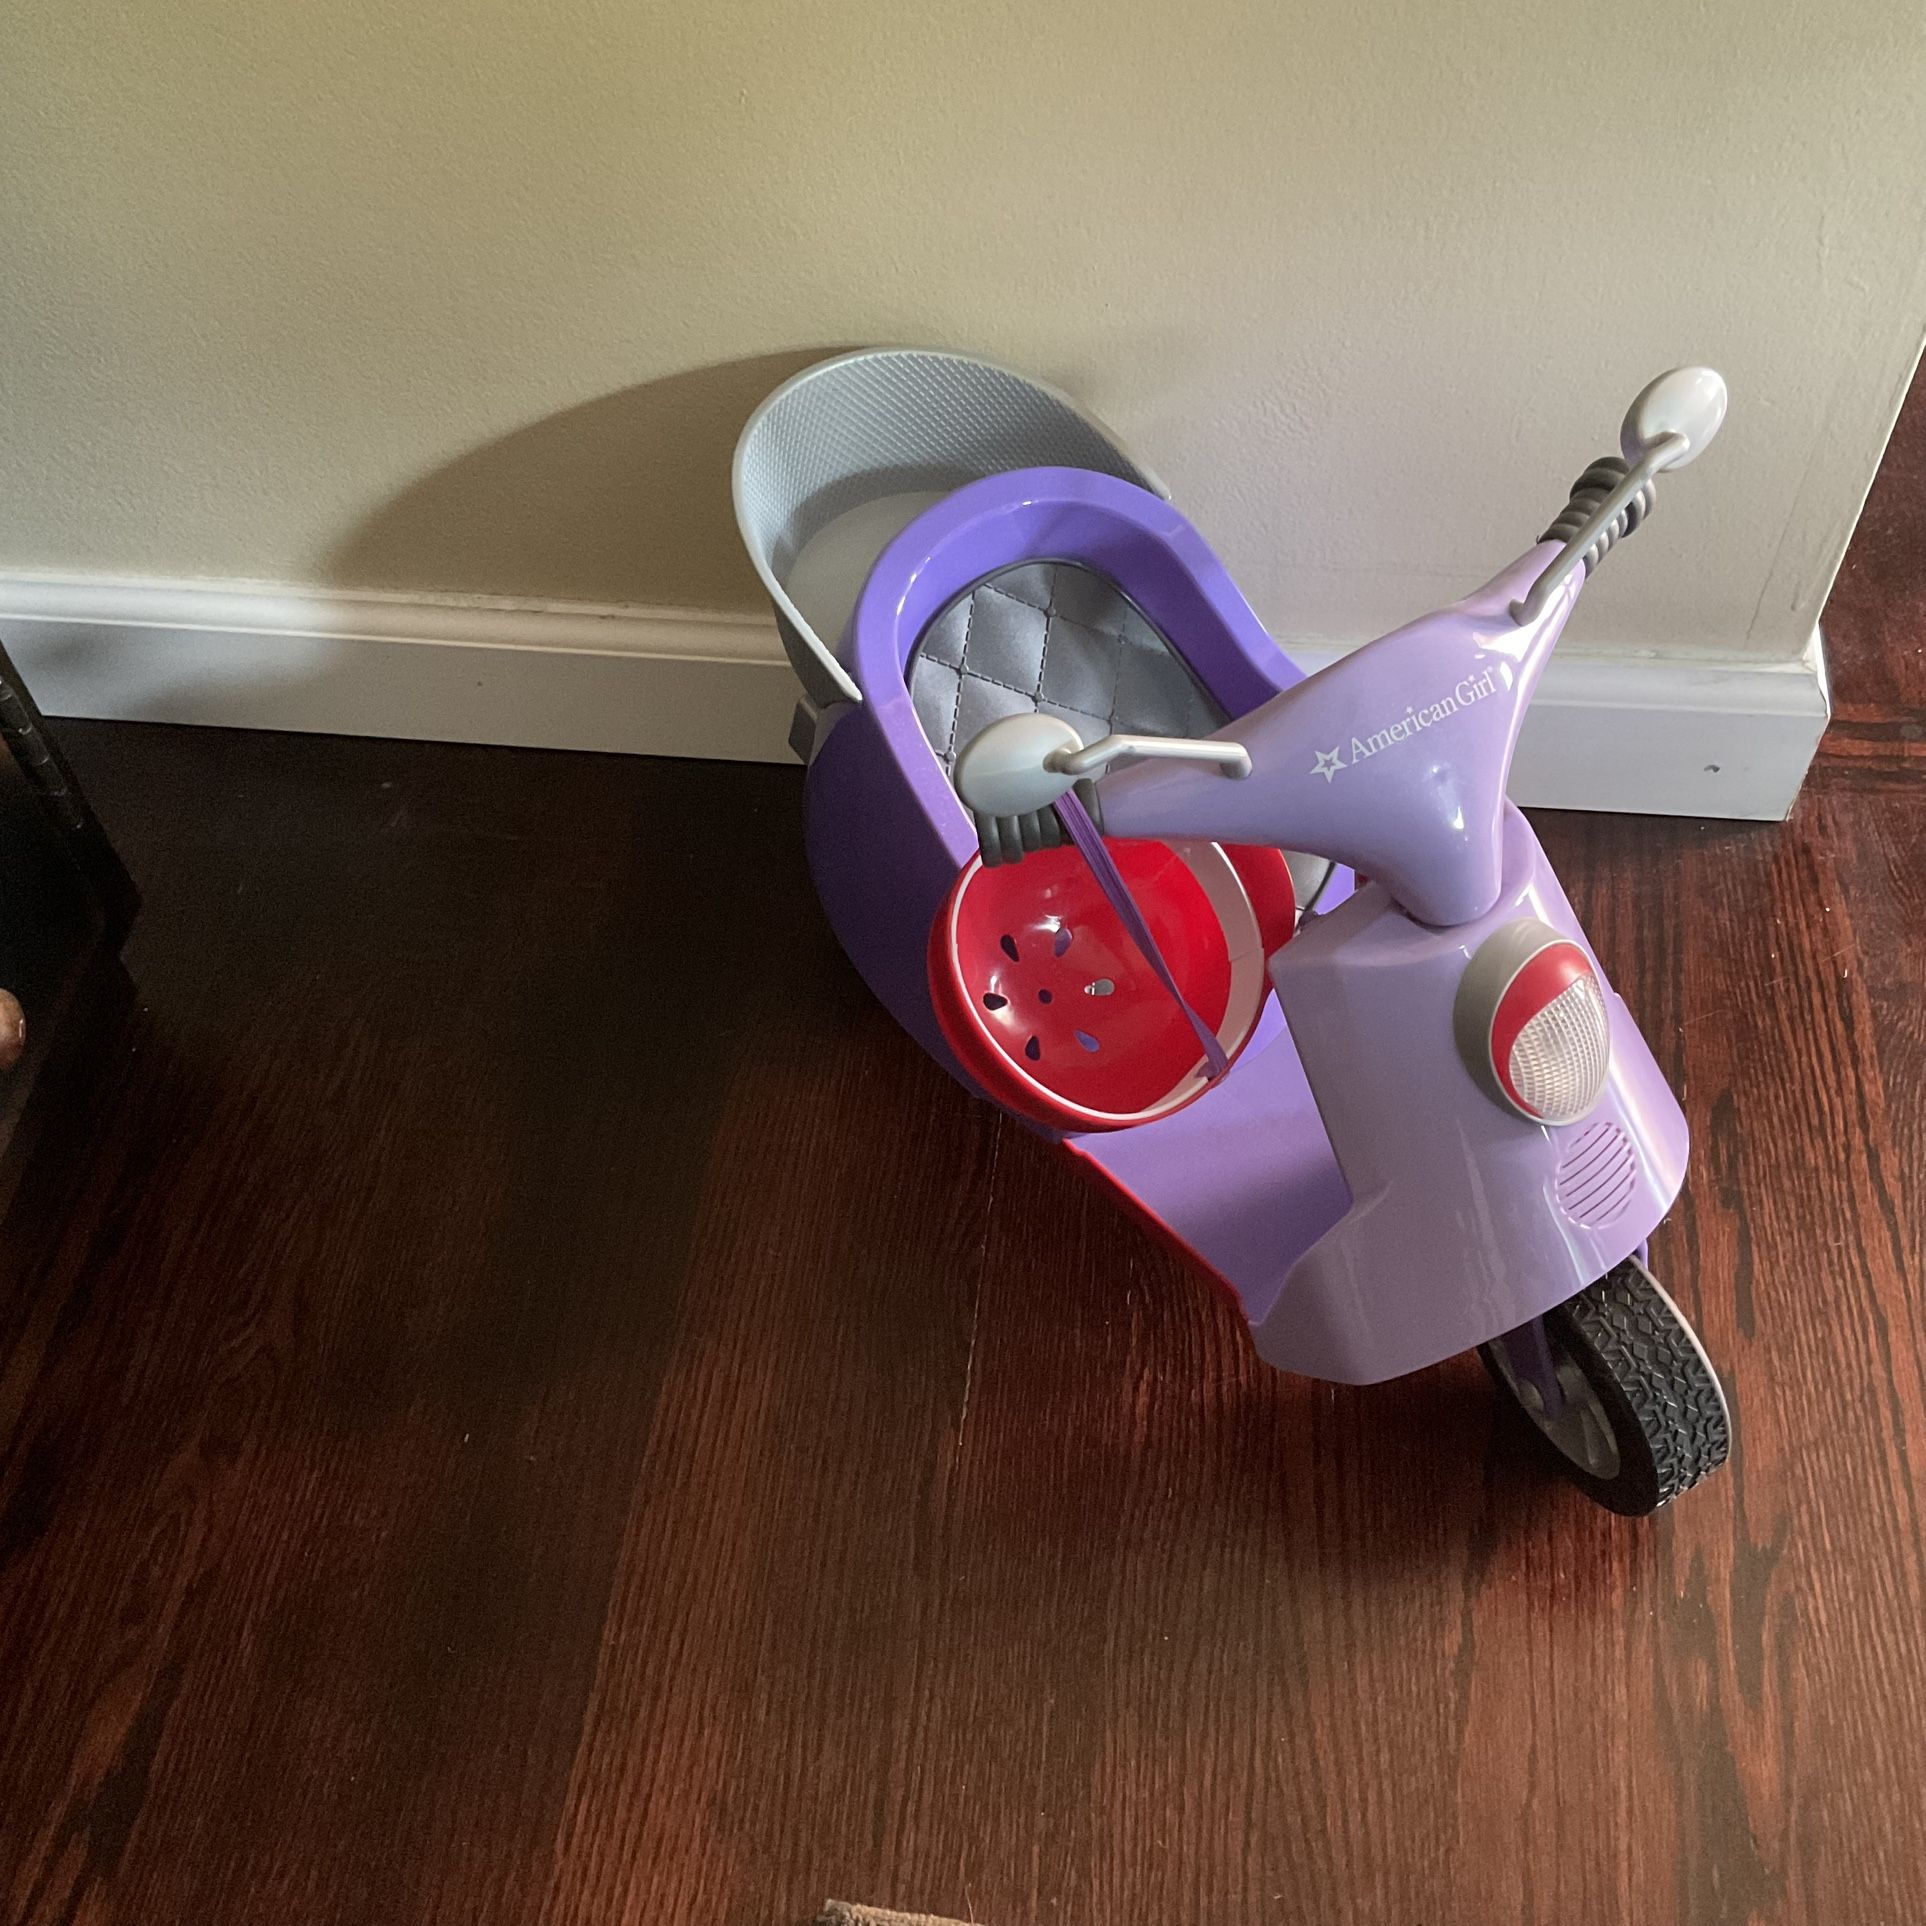 American Girl Doll Truly Me Scooter Helmet Set, $35